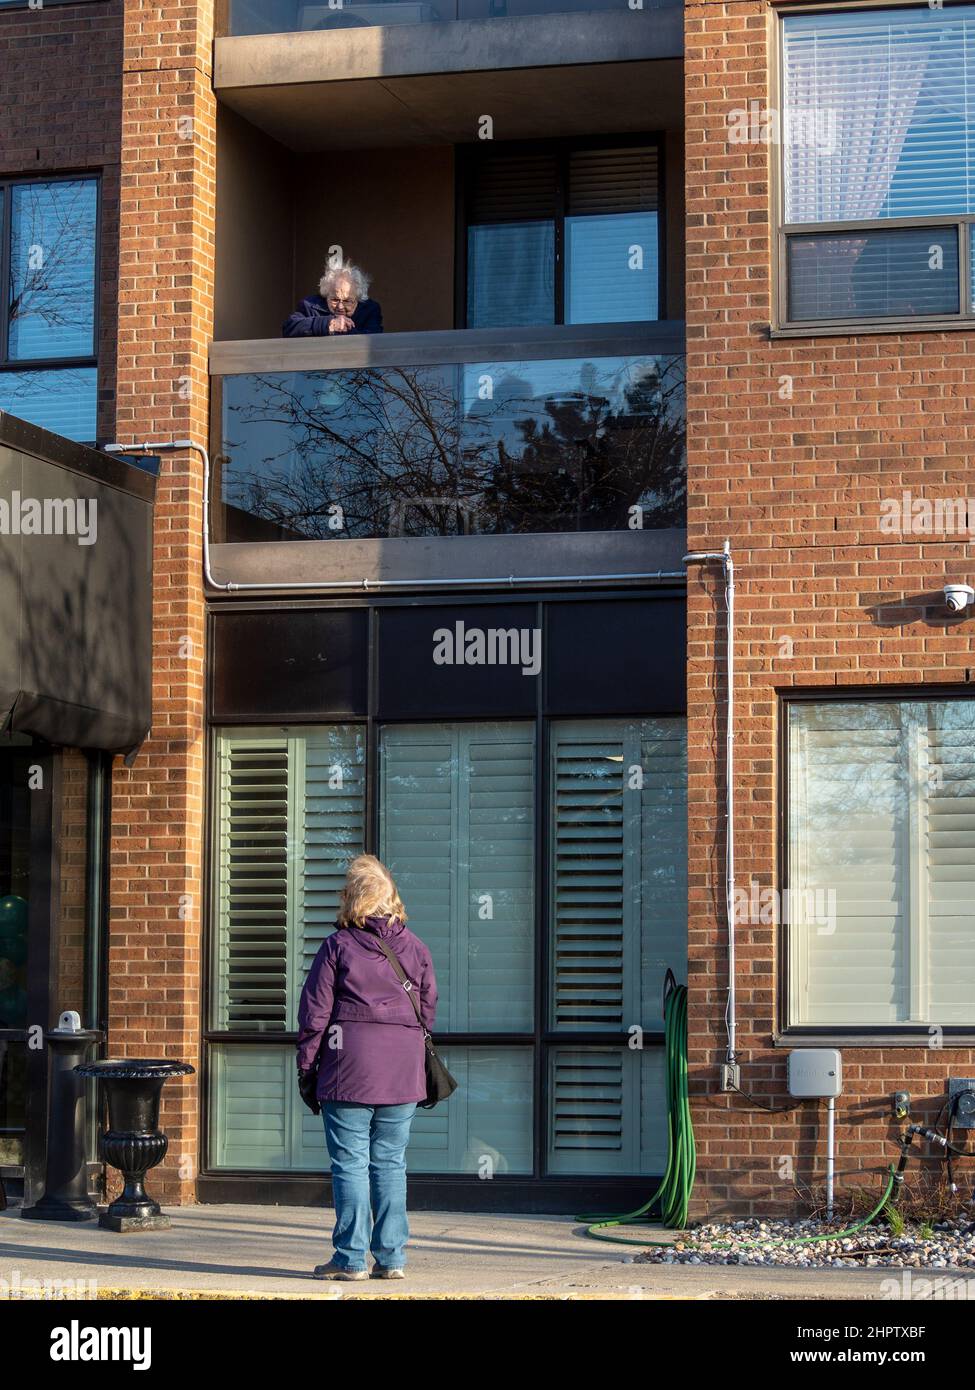 Distance visit during a pandemic lockdown: A woman visits with her mother perched above her on a second floor balcony during the COVID-19 pandemic of 2020 and 2021. Stock Photo